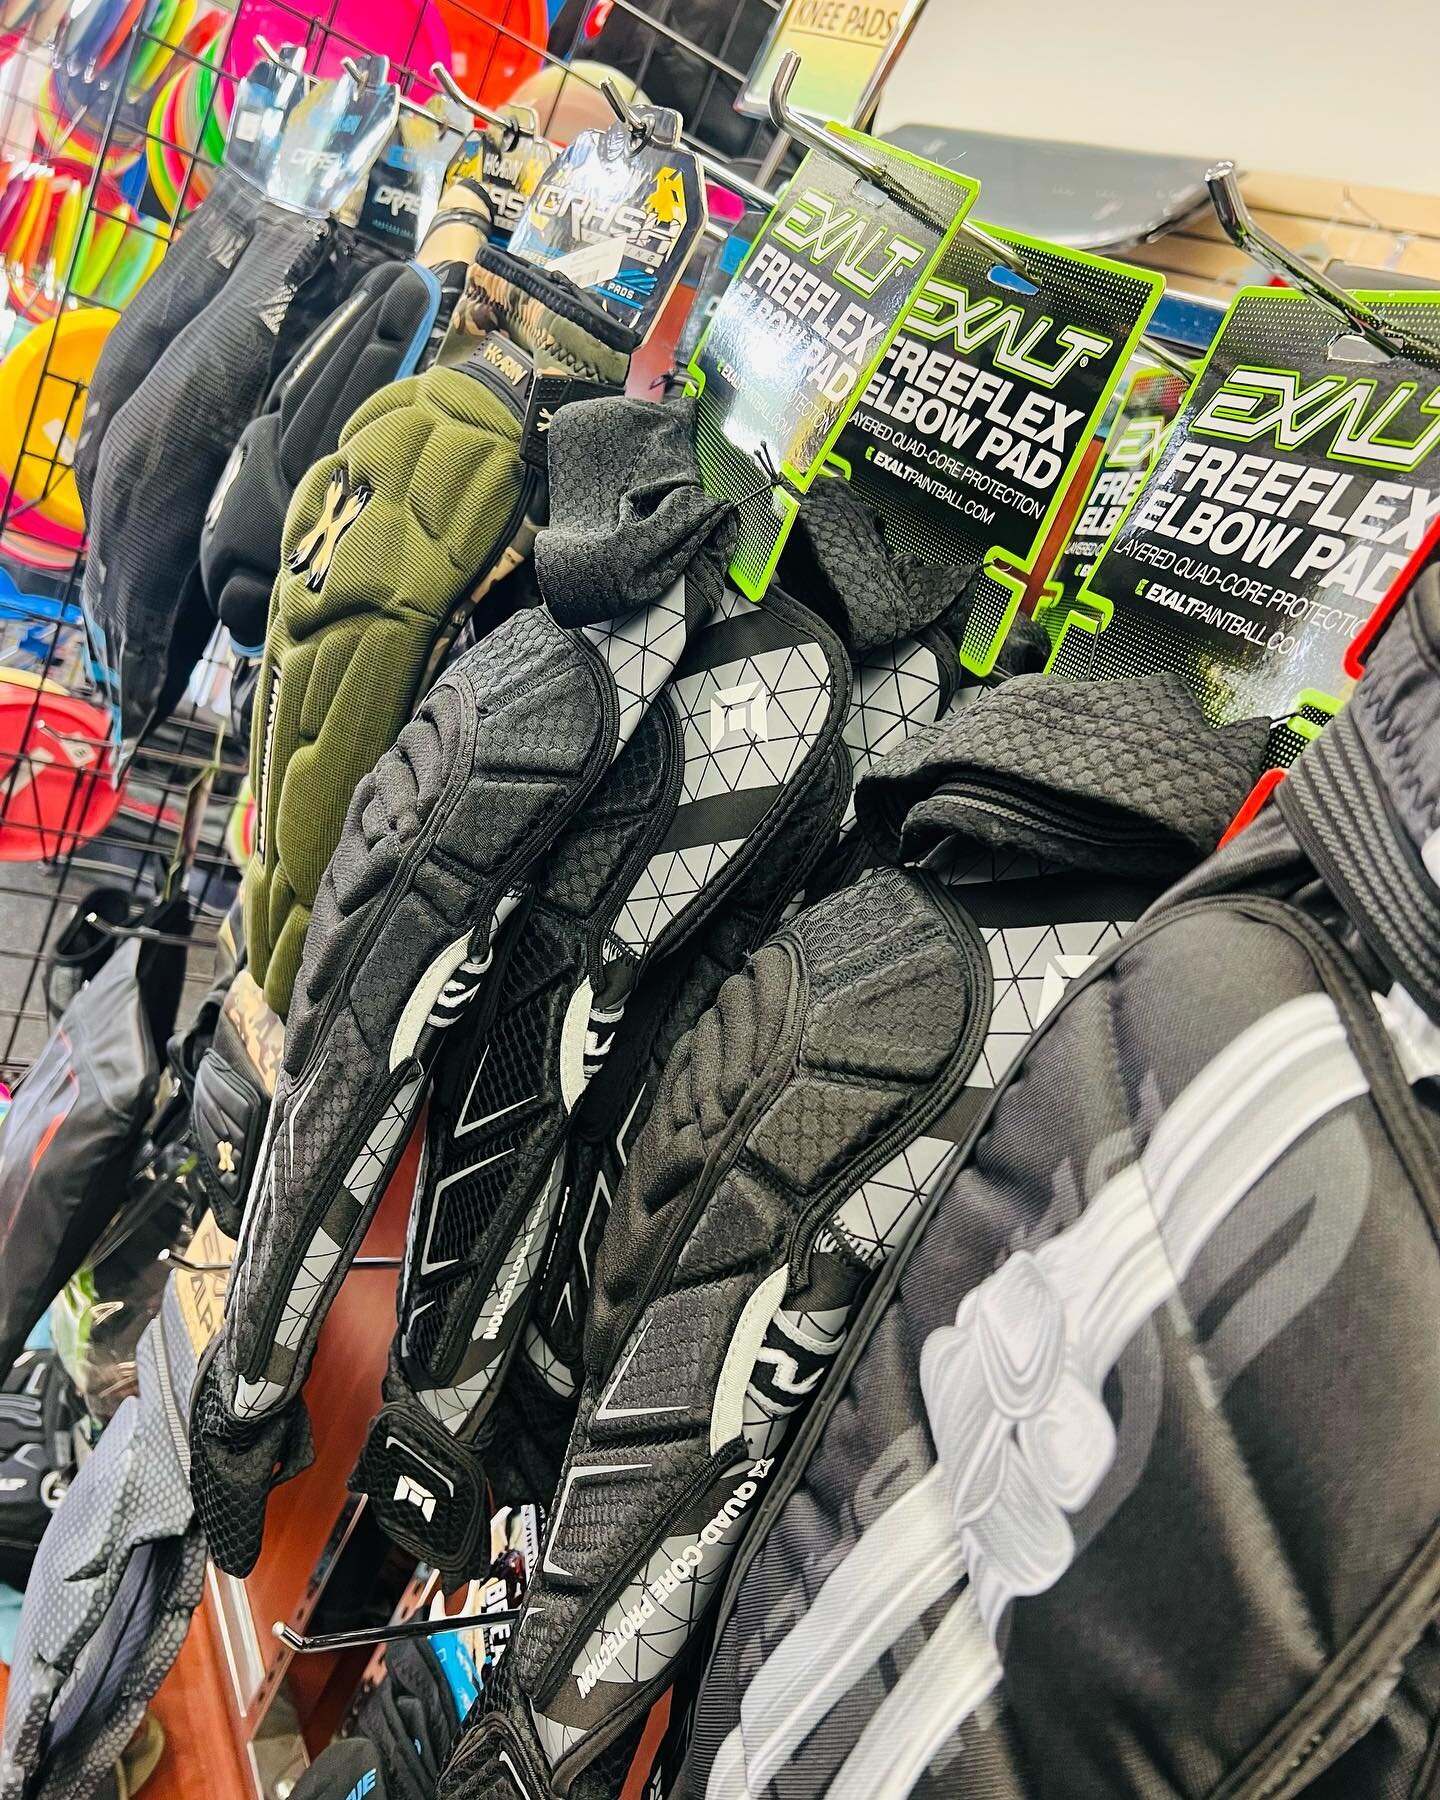 Lots of #newnew in stock now! 🤟
#paintballl #discgolf #skateboard #andmore #levenaactionsports 

⚜️2100 Verot School Rd. Suite 5
⚜️www.shoplevena.com